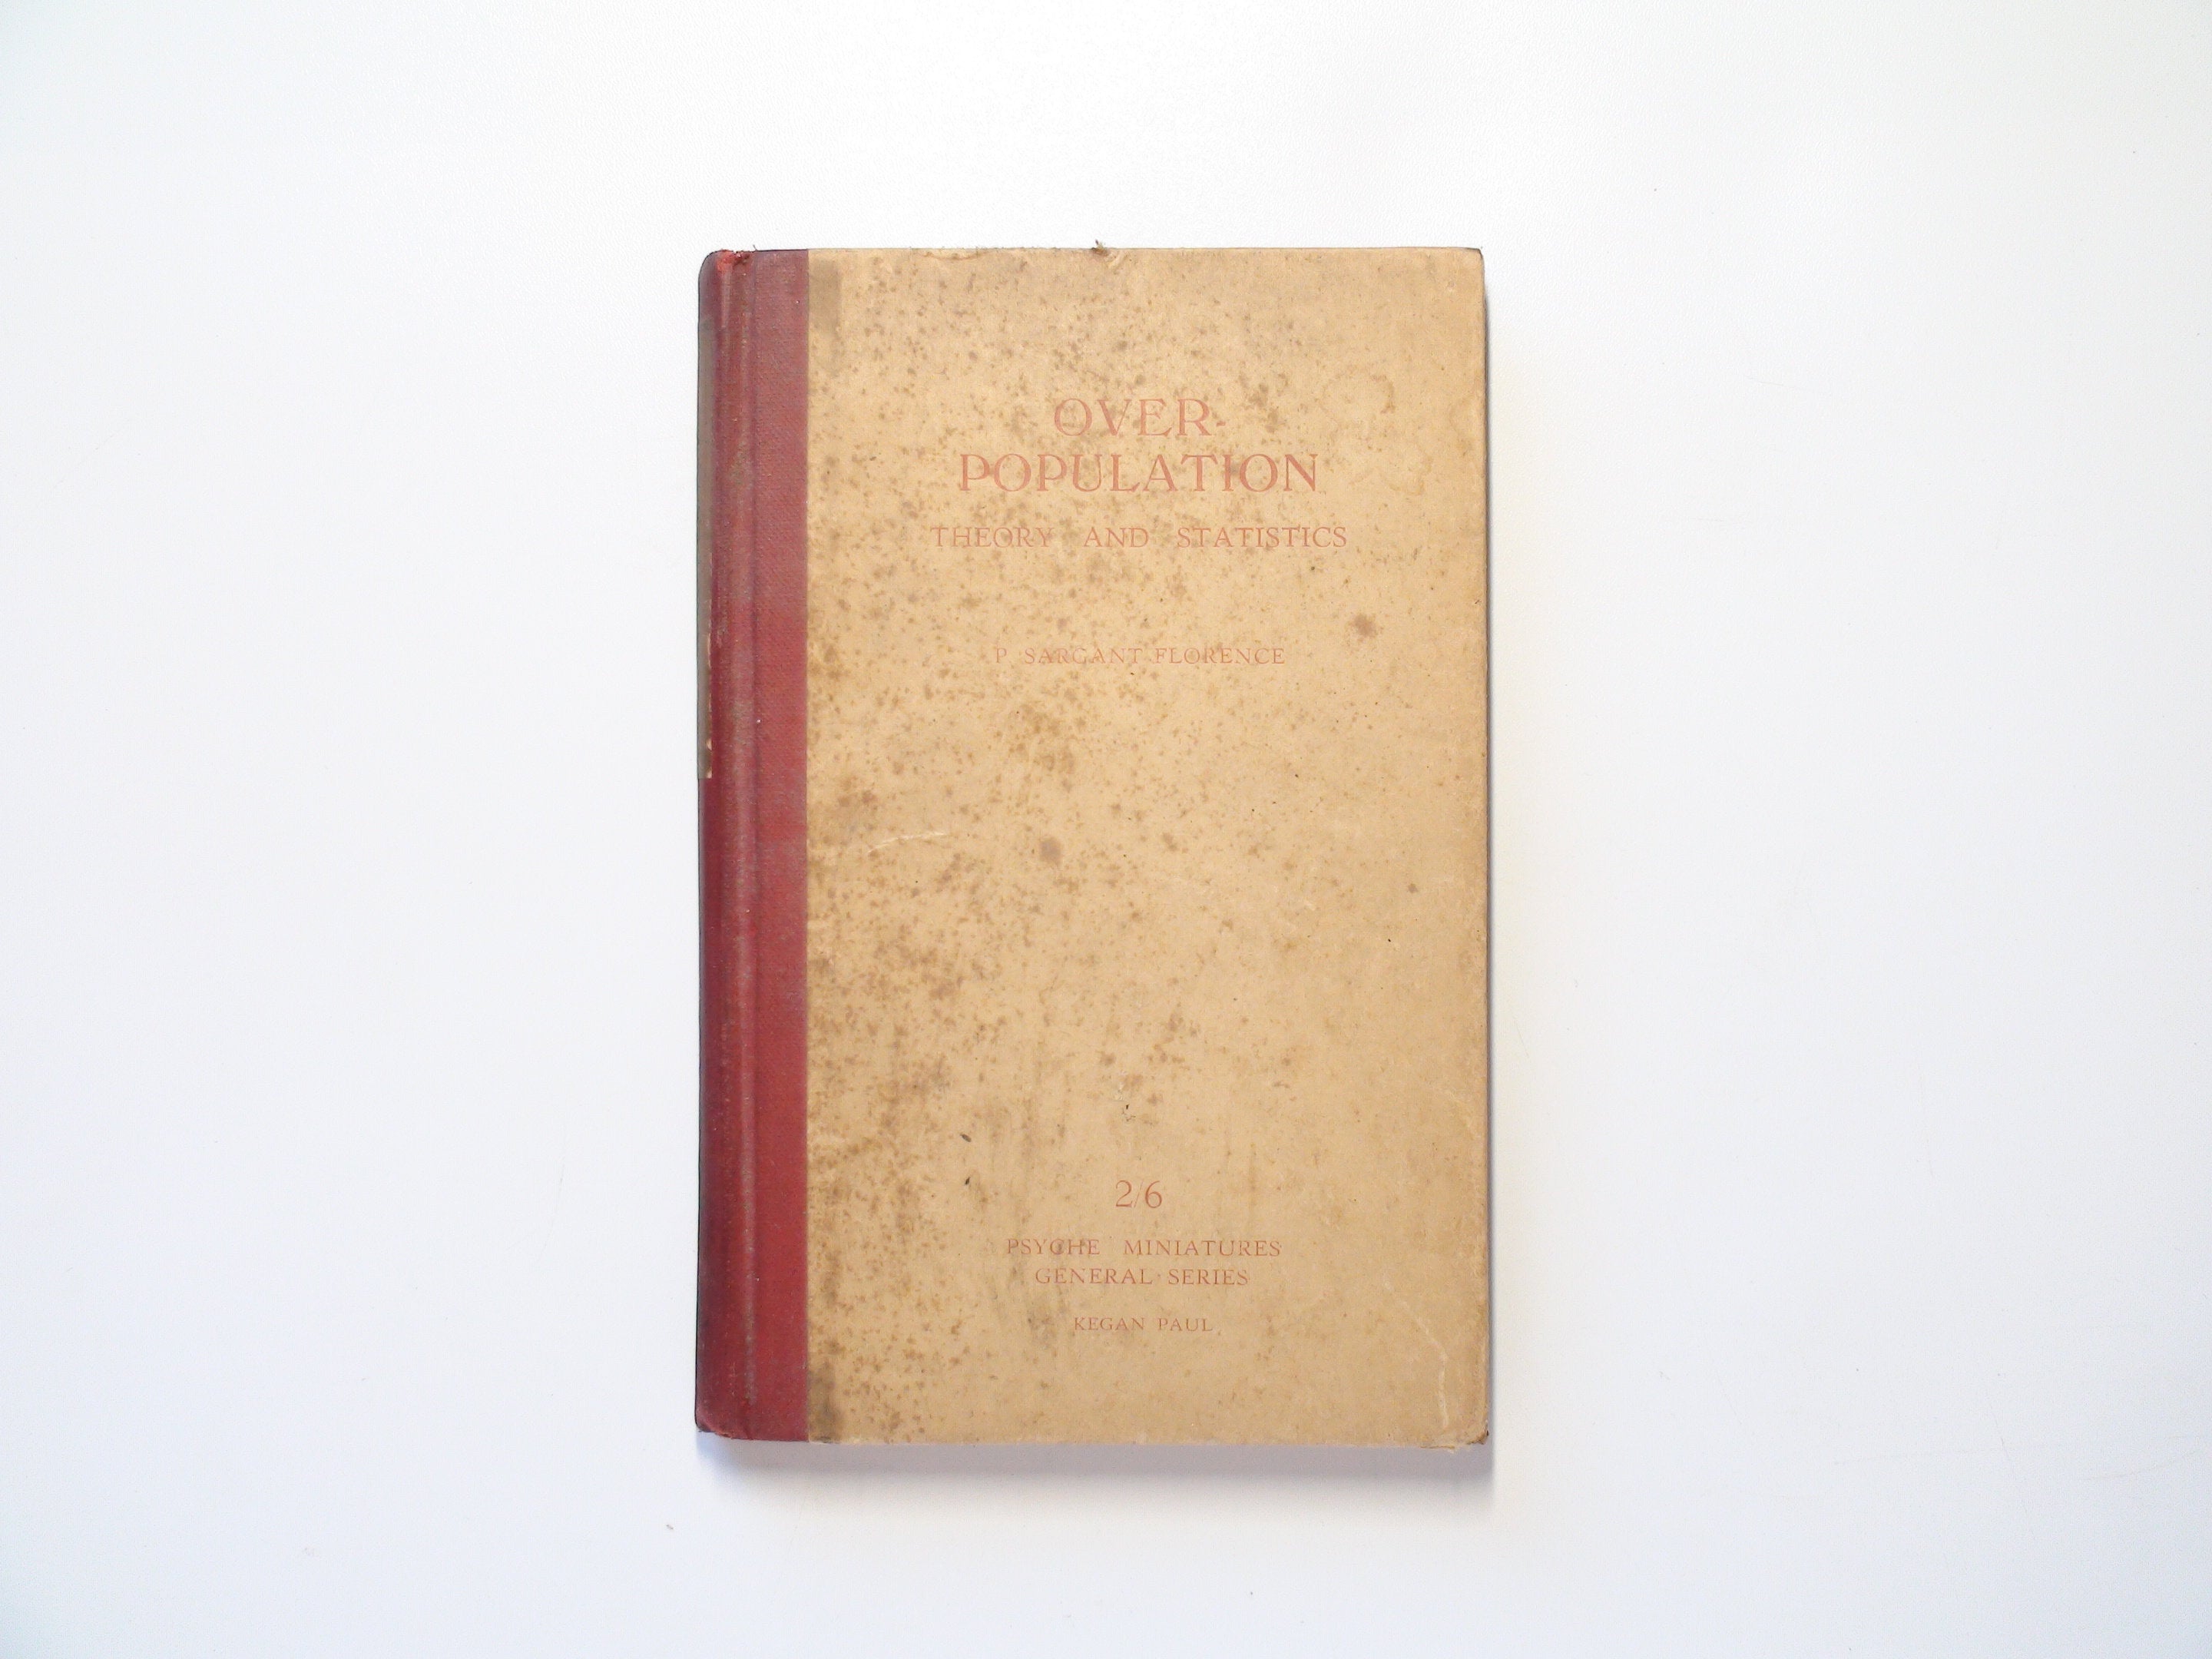 Over-Population Theory and Statistics, by P. Sargant Florence, 1st Ed, 1926